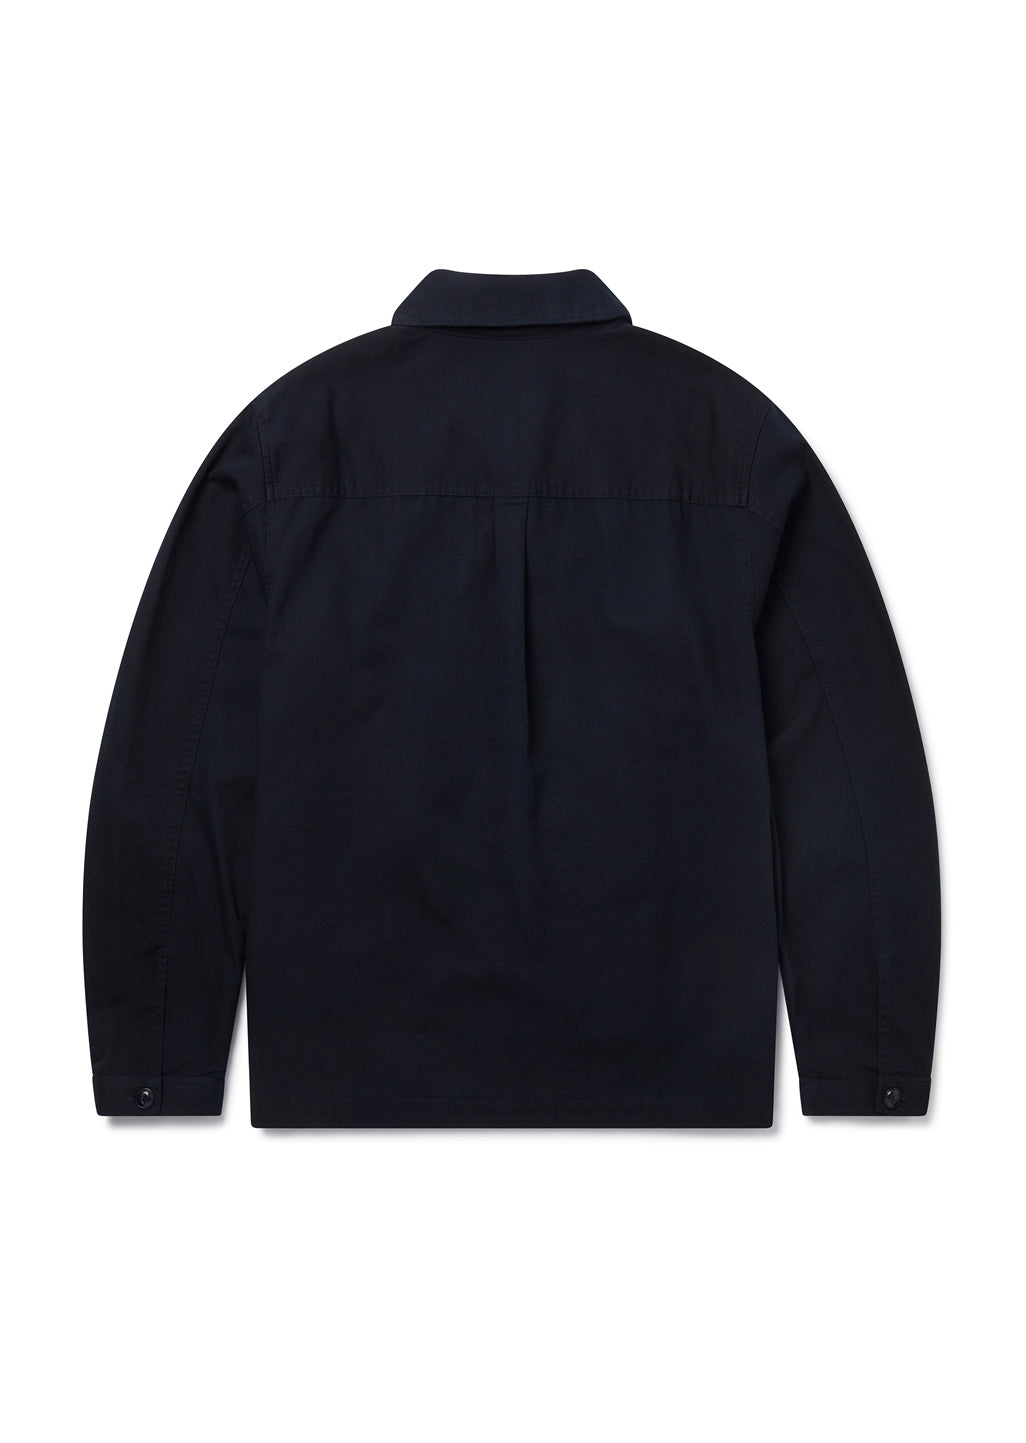 Sanded Canvas Work Shirt in Navy